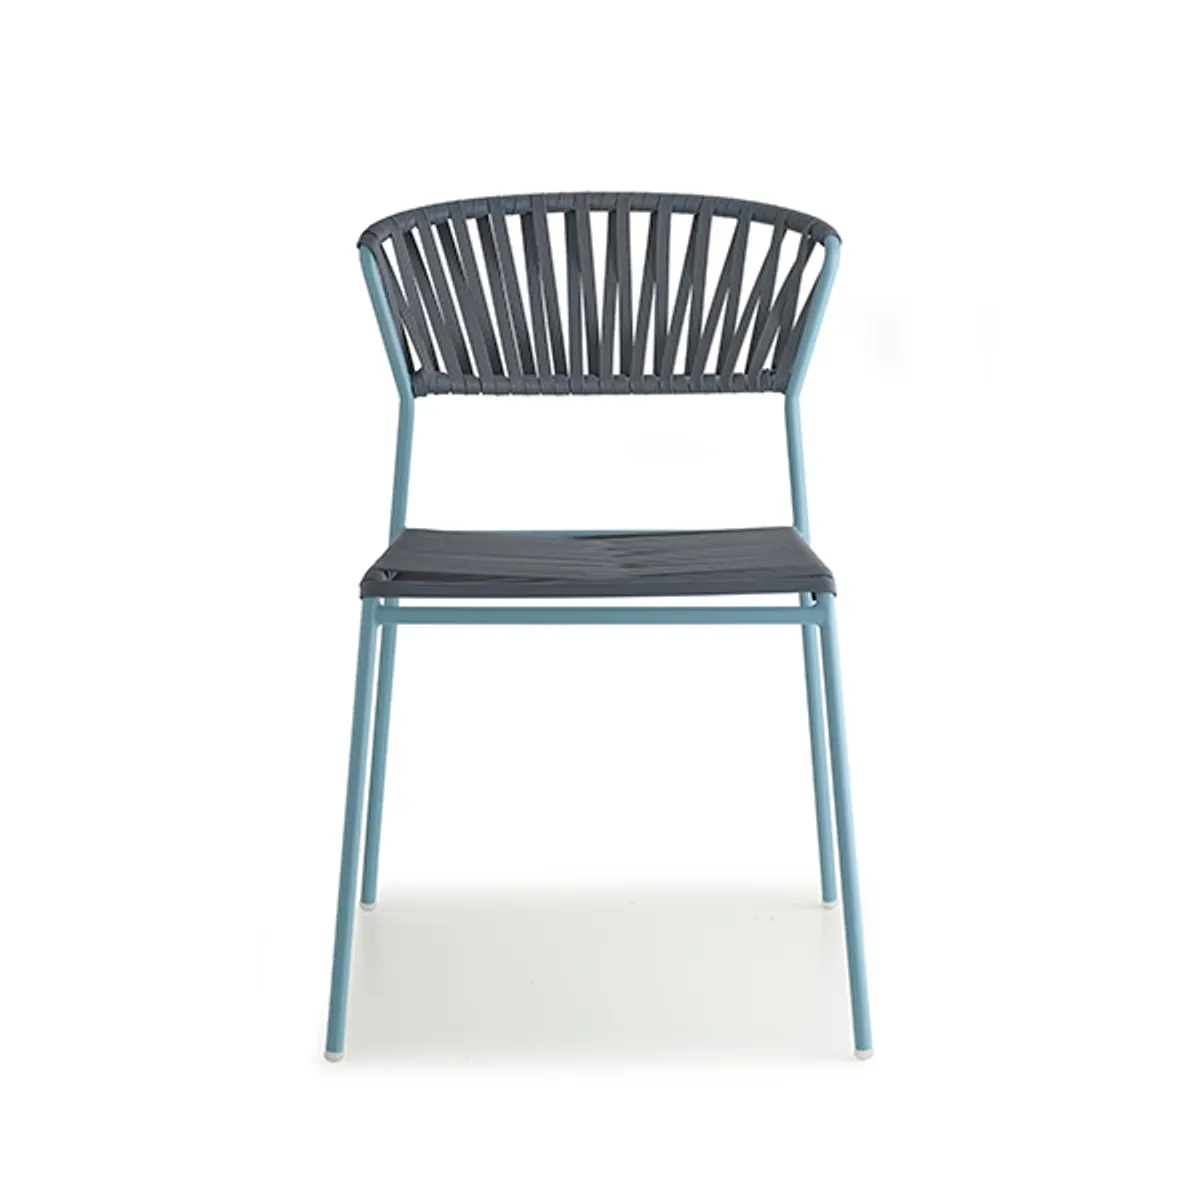 Robyn Pvc Exterior Chair For Commercial Use Inside Out Contracts 020